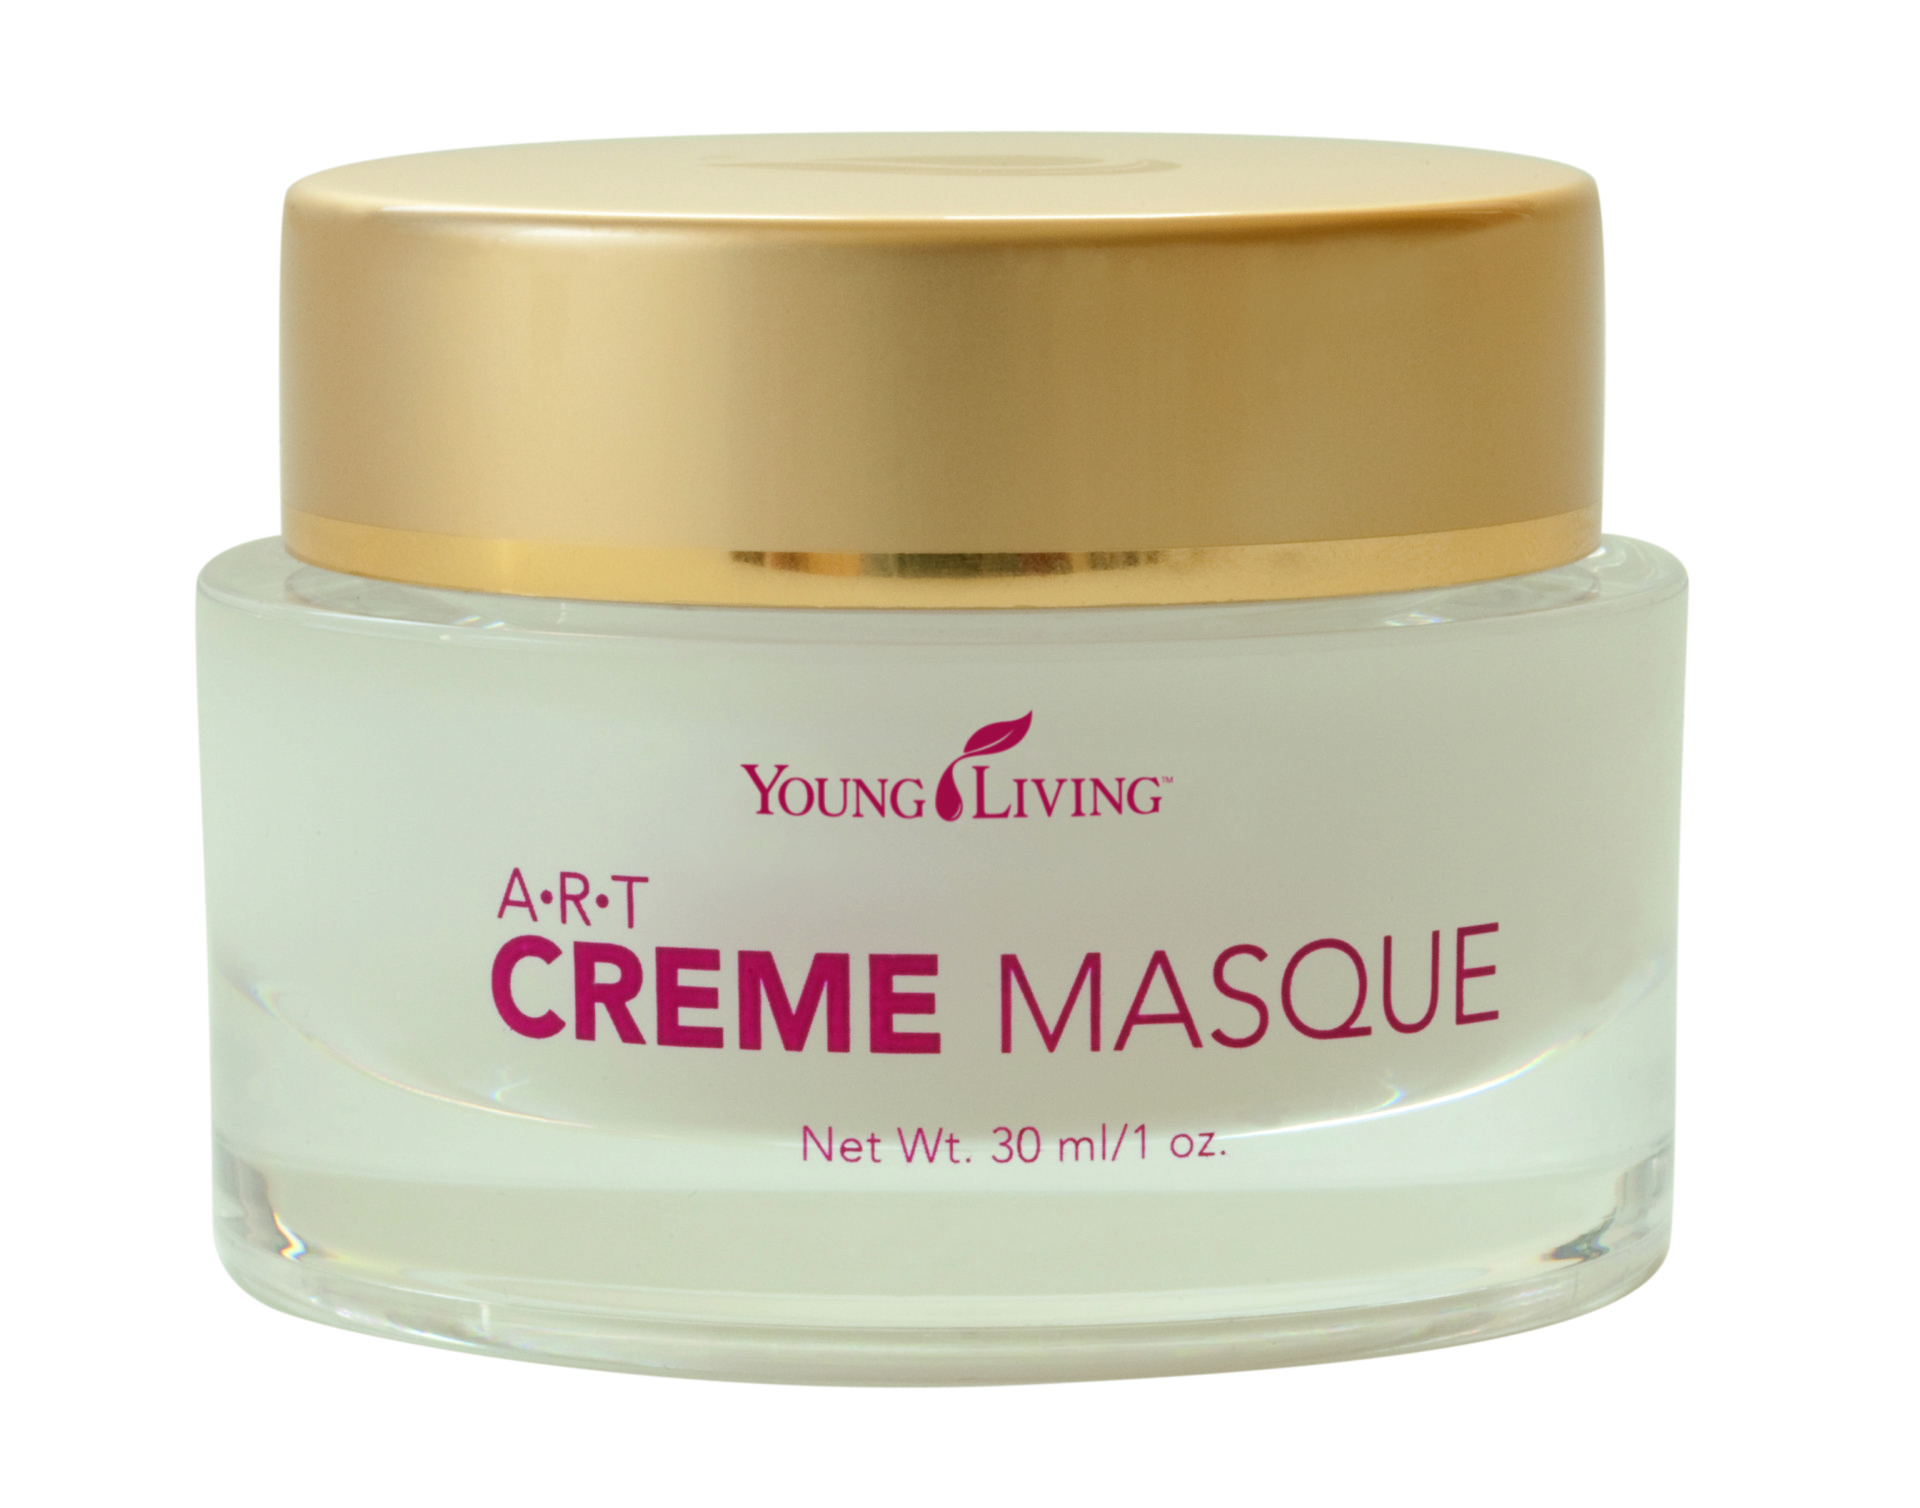 ART Creme Masque is a perfect reward for keeping your healthy habits for the new year